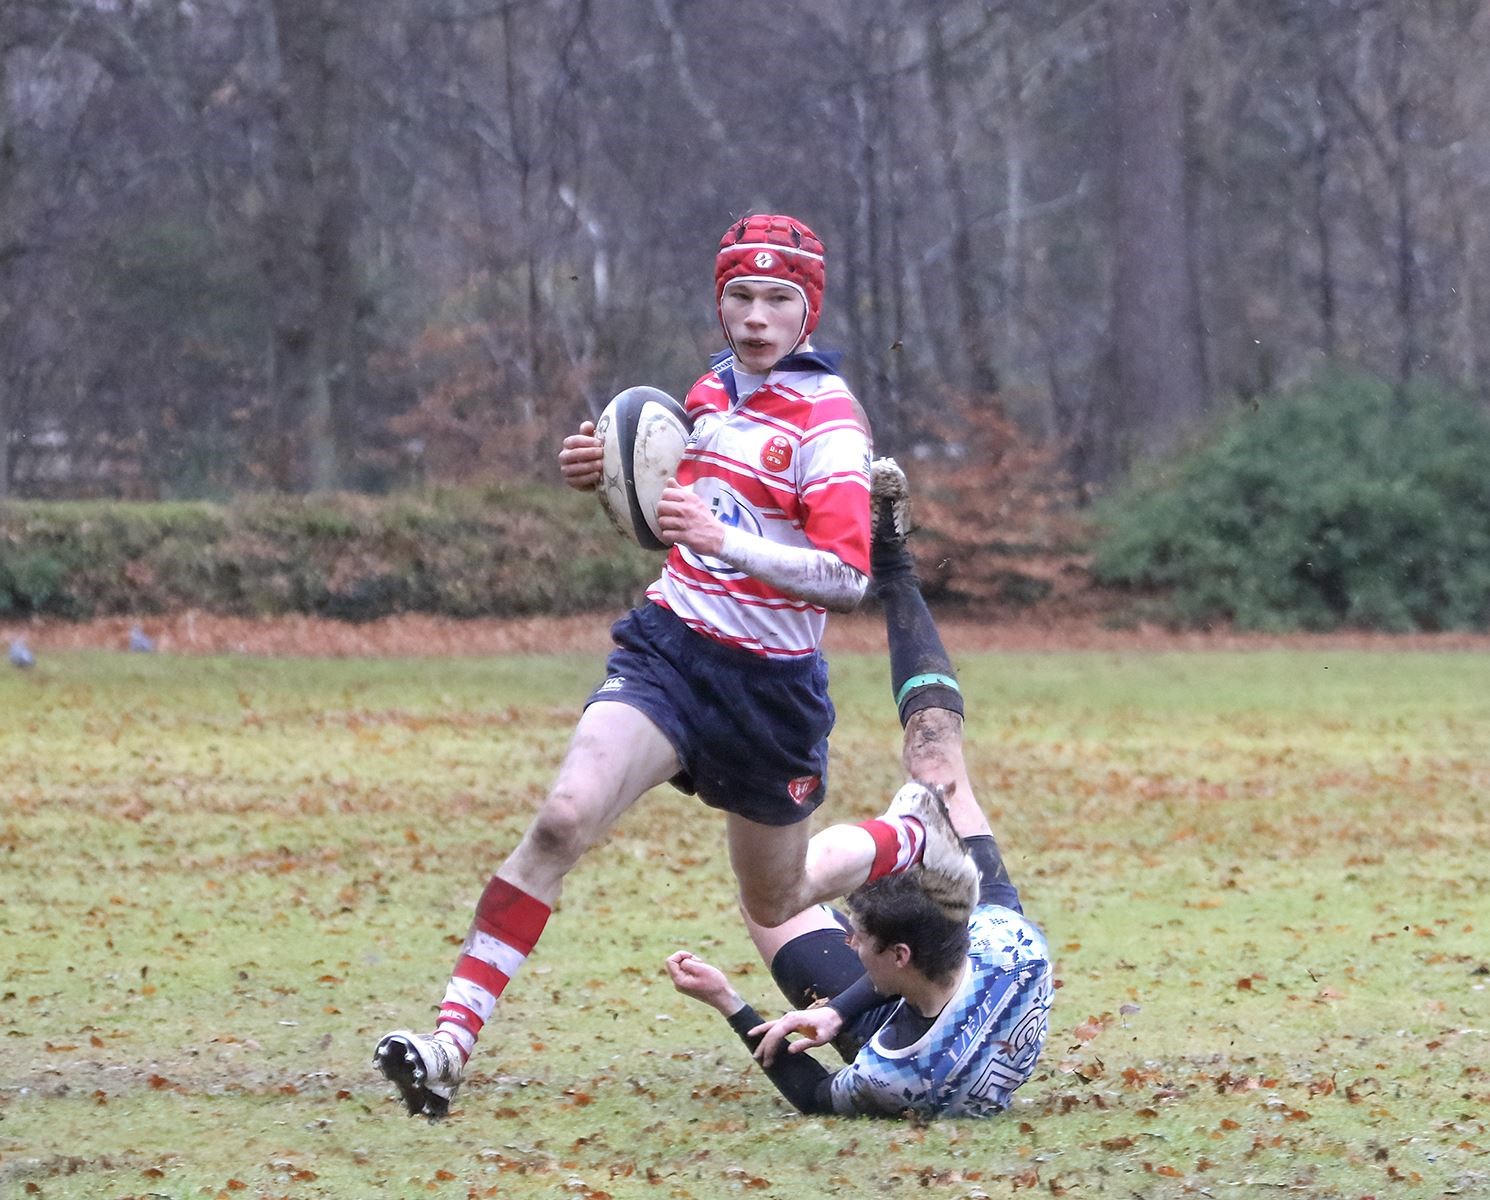 Lewis Hay gets outside a defender on his way to scoring a try. Photo: John MacGregor